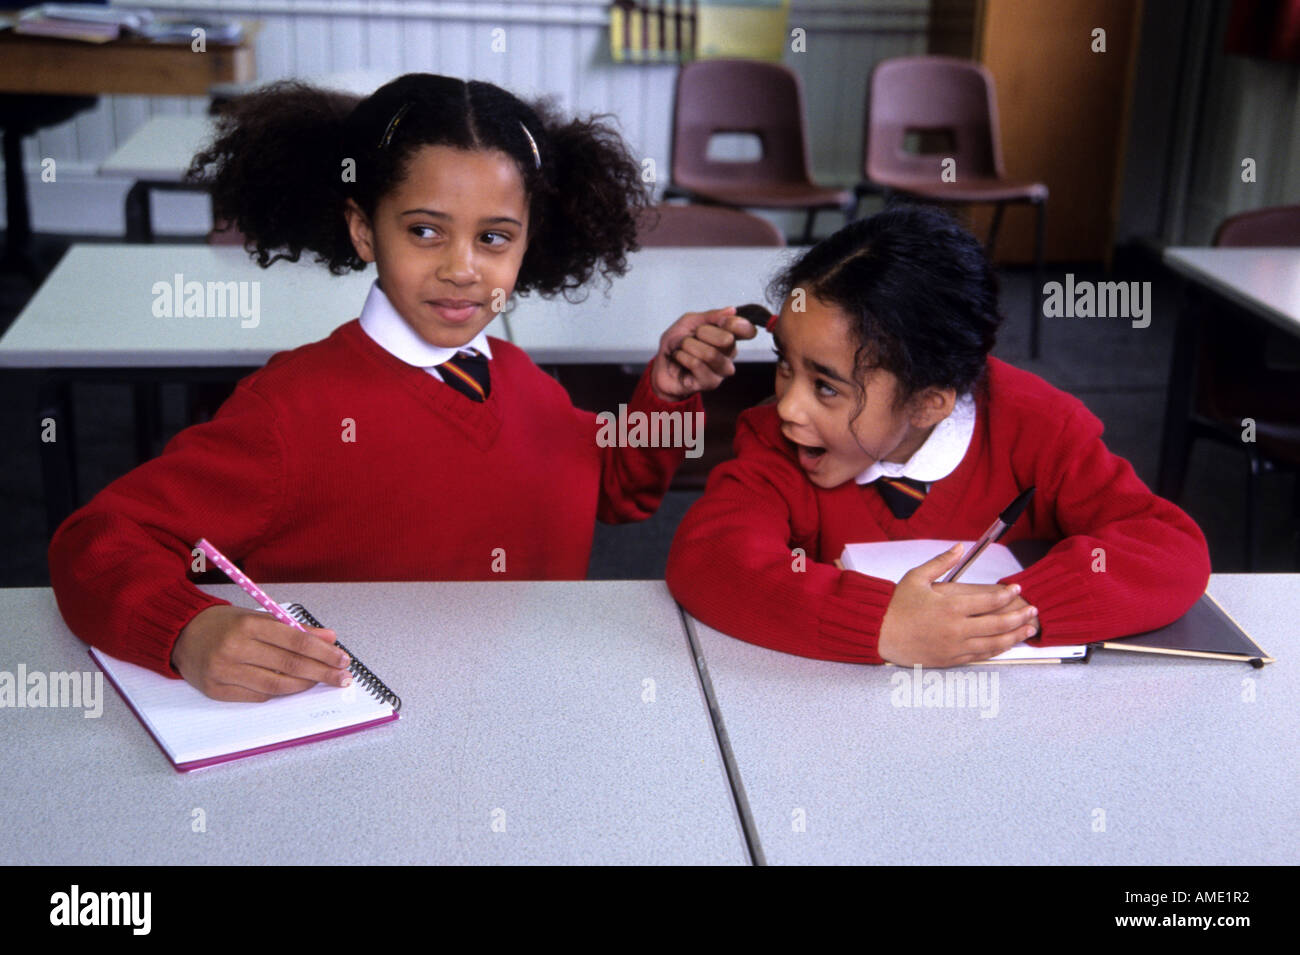 Little girls messing around in a classroom. Stock Photo